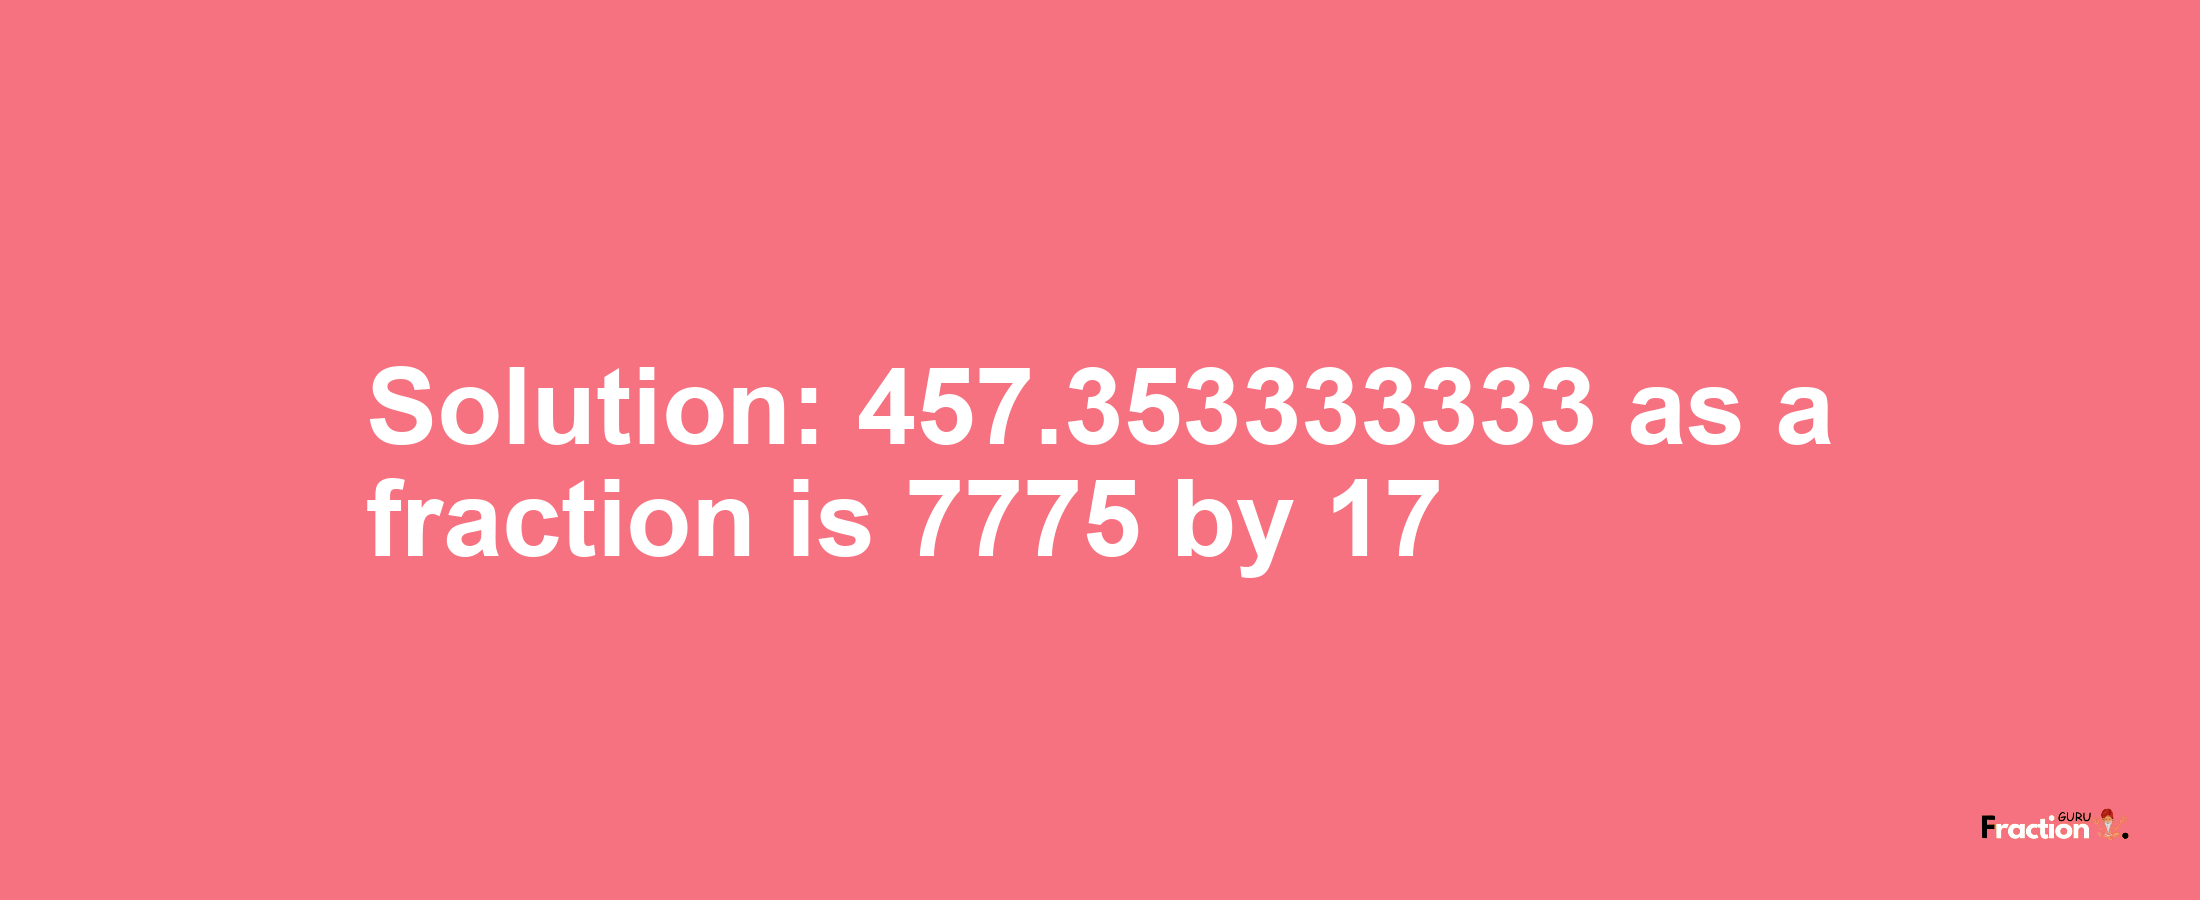 Solution:457.353333333 as a fraction is 7775/17